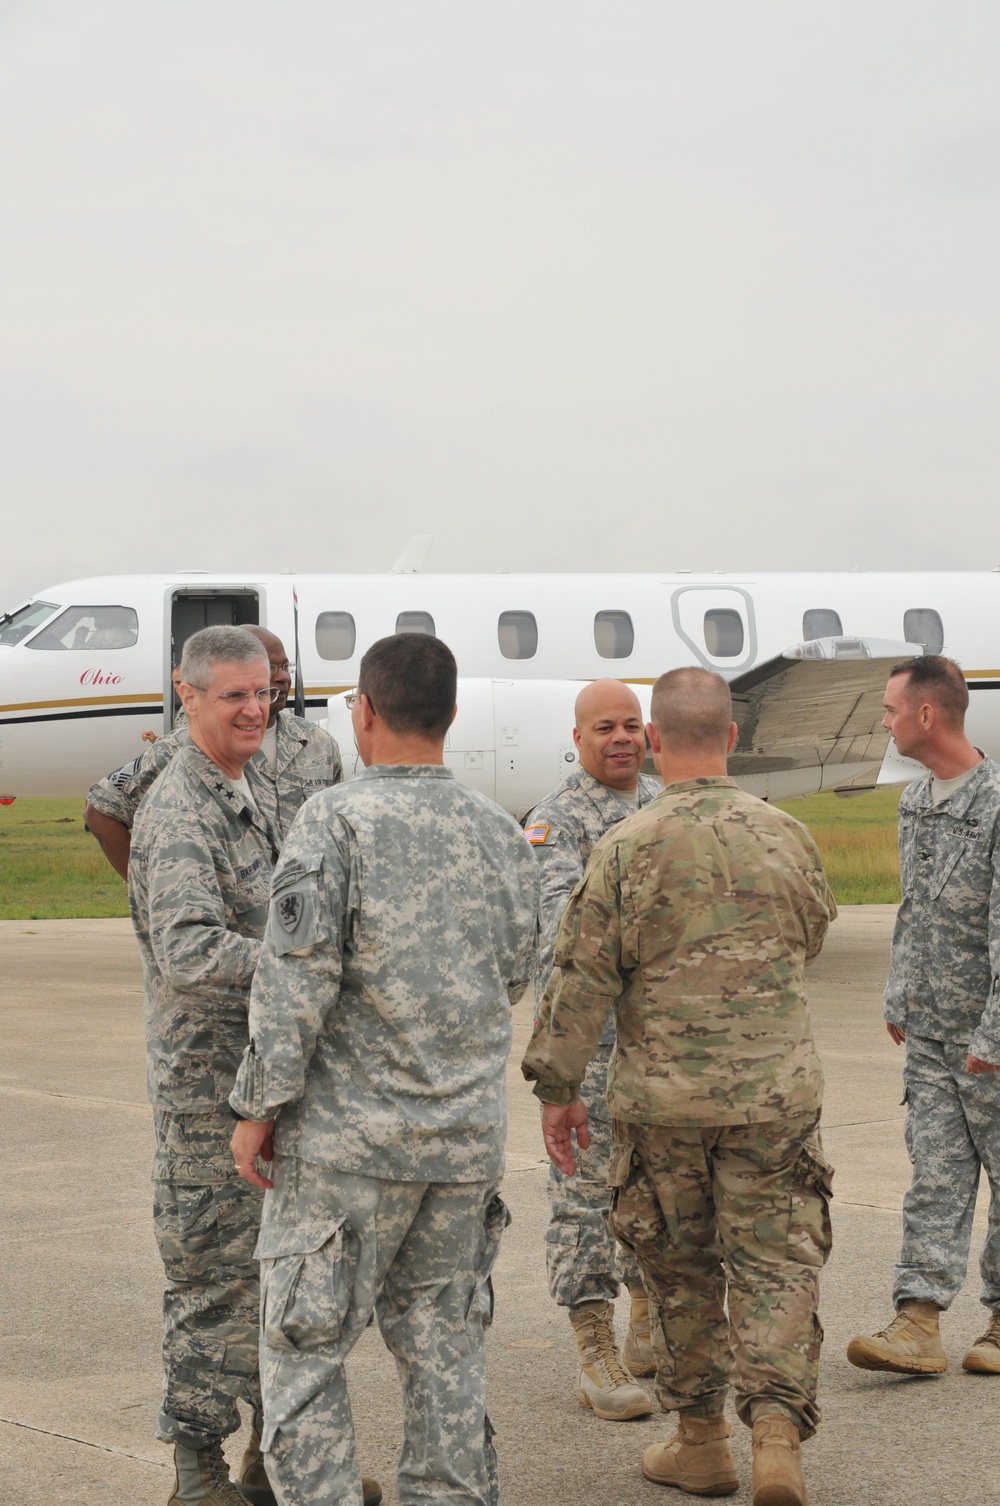 Ohio senior leadership travels to Camp Grayling to see 37th IBCT in action during AT ‘15